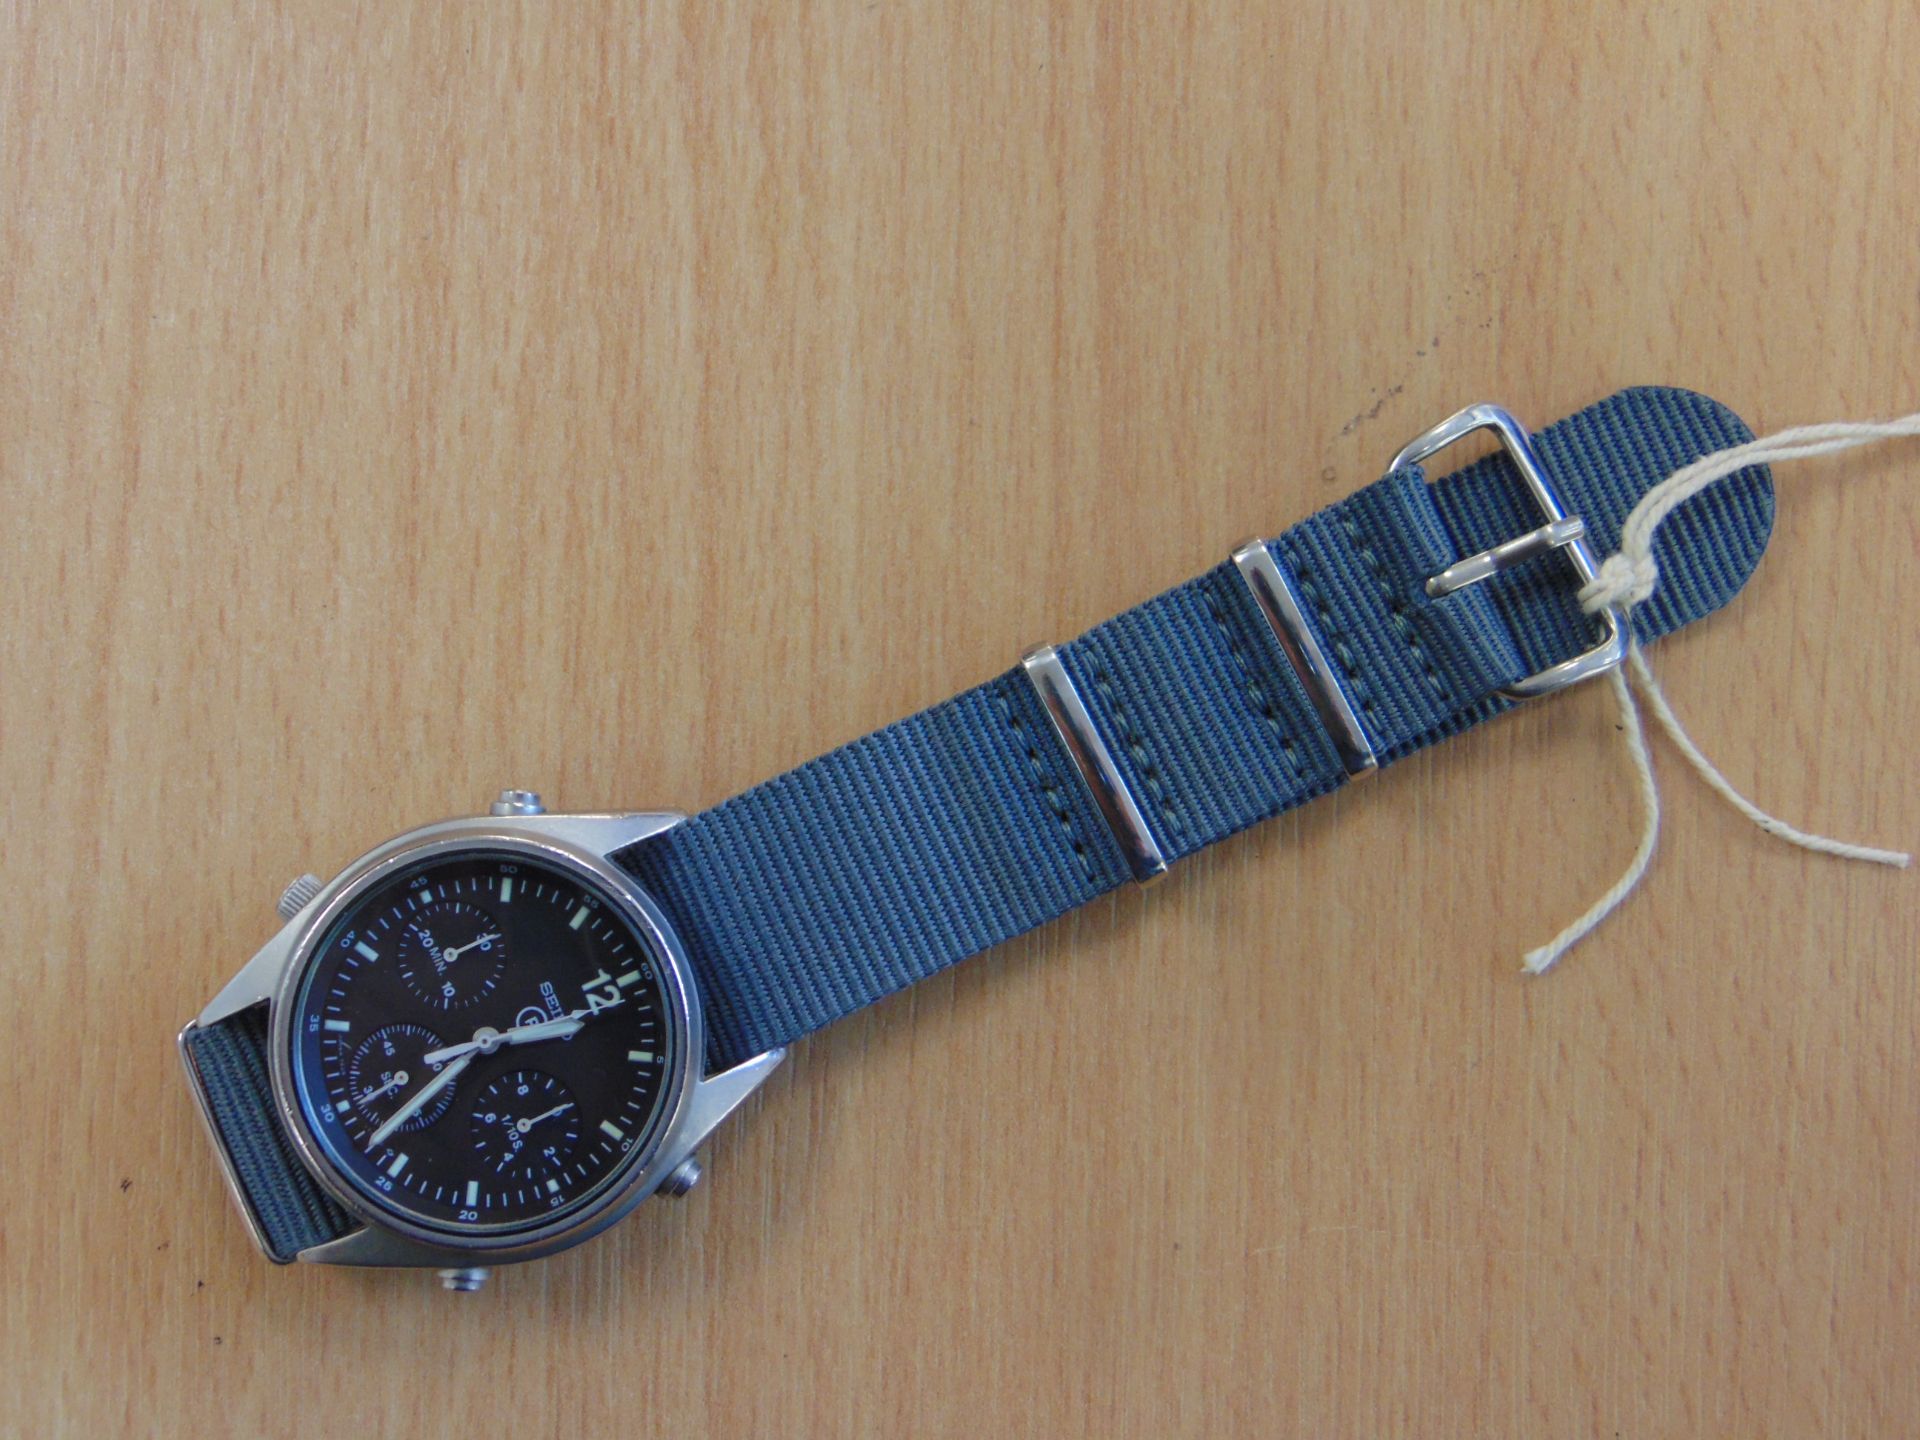 SEIKO GEN 1 PILOTS CHRONO RAF ISSUE WATCH NATO MARKINGS DATED 1984 - Image 2 of 9